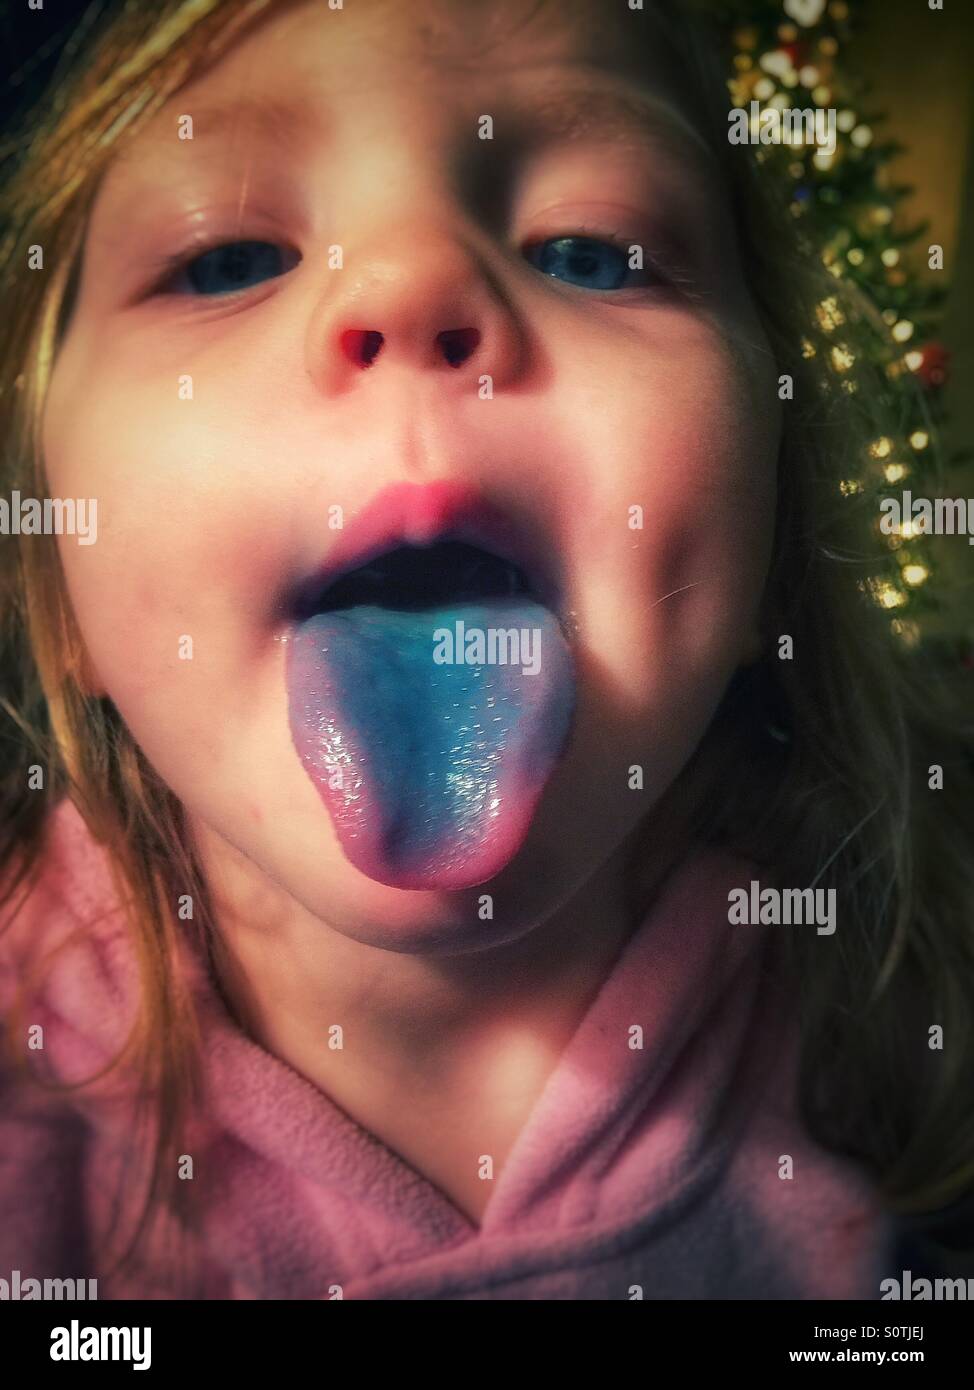 Little girl sticking out her blue tongue Stock Photo